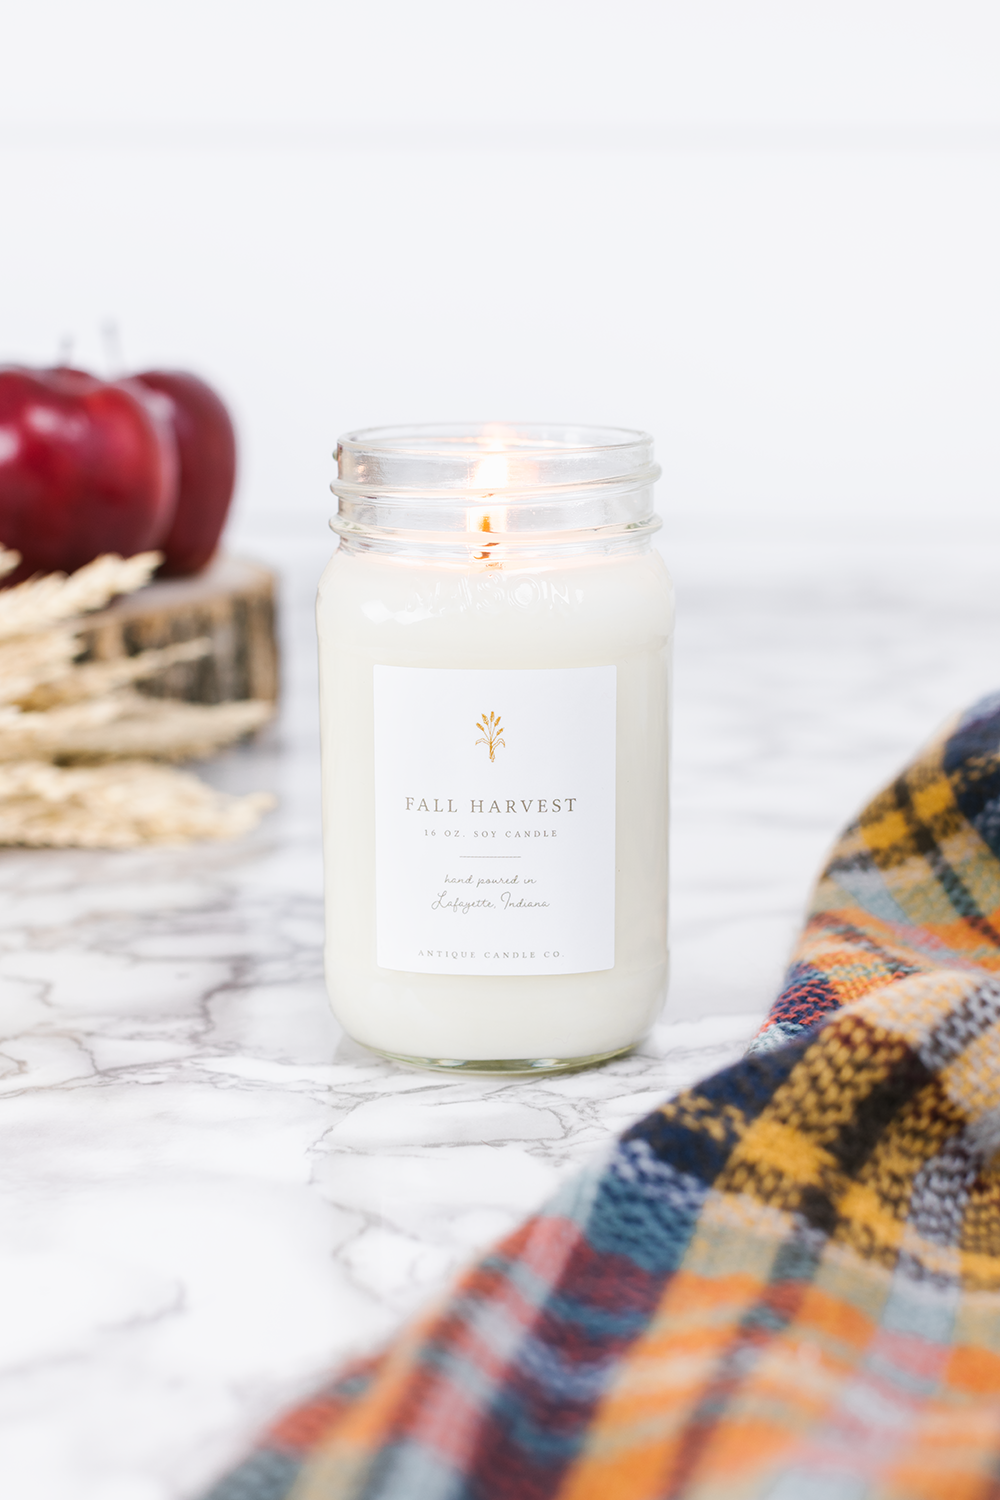 Fall Harvest 16oz Candle